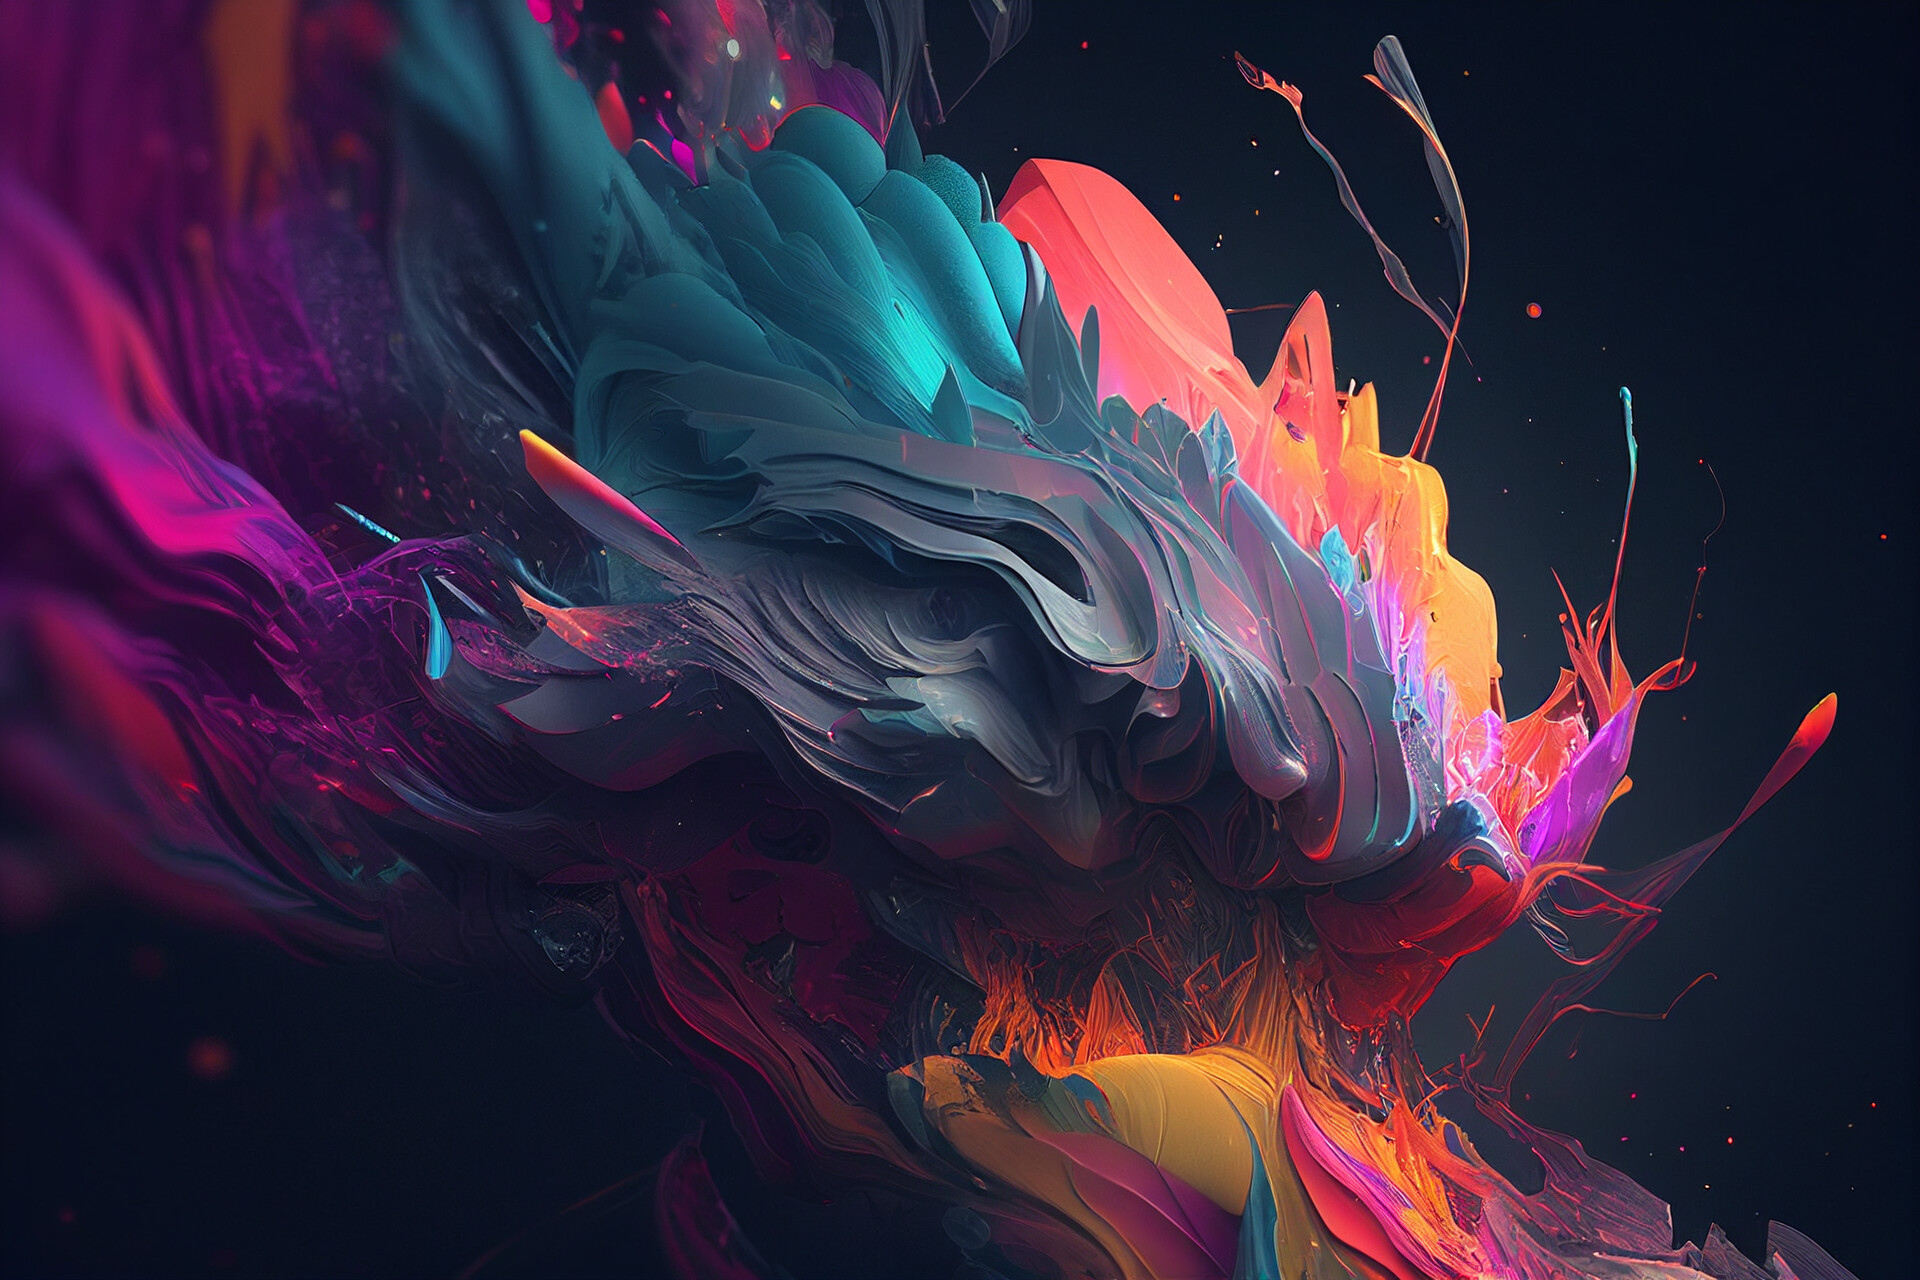 ArtStation - Abstract Colorful Art